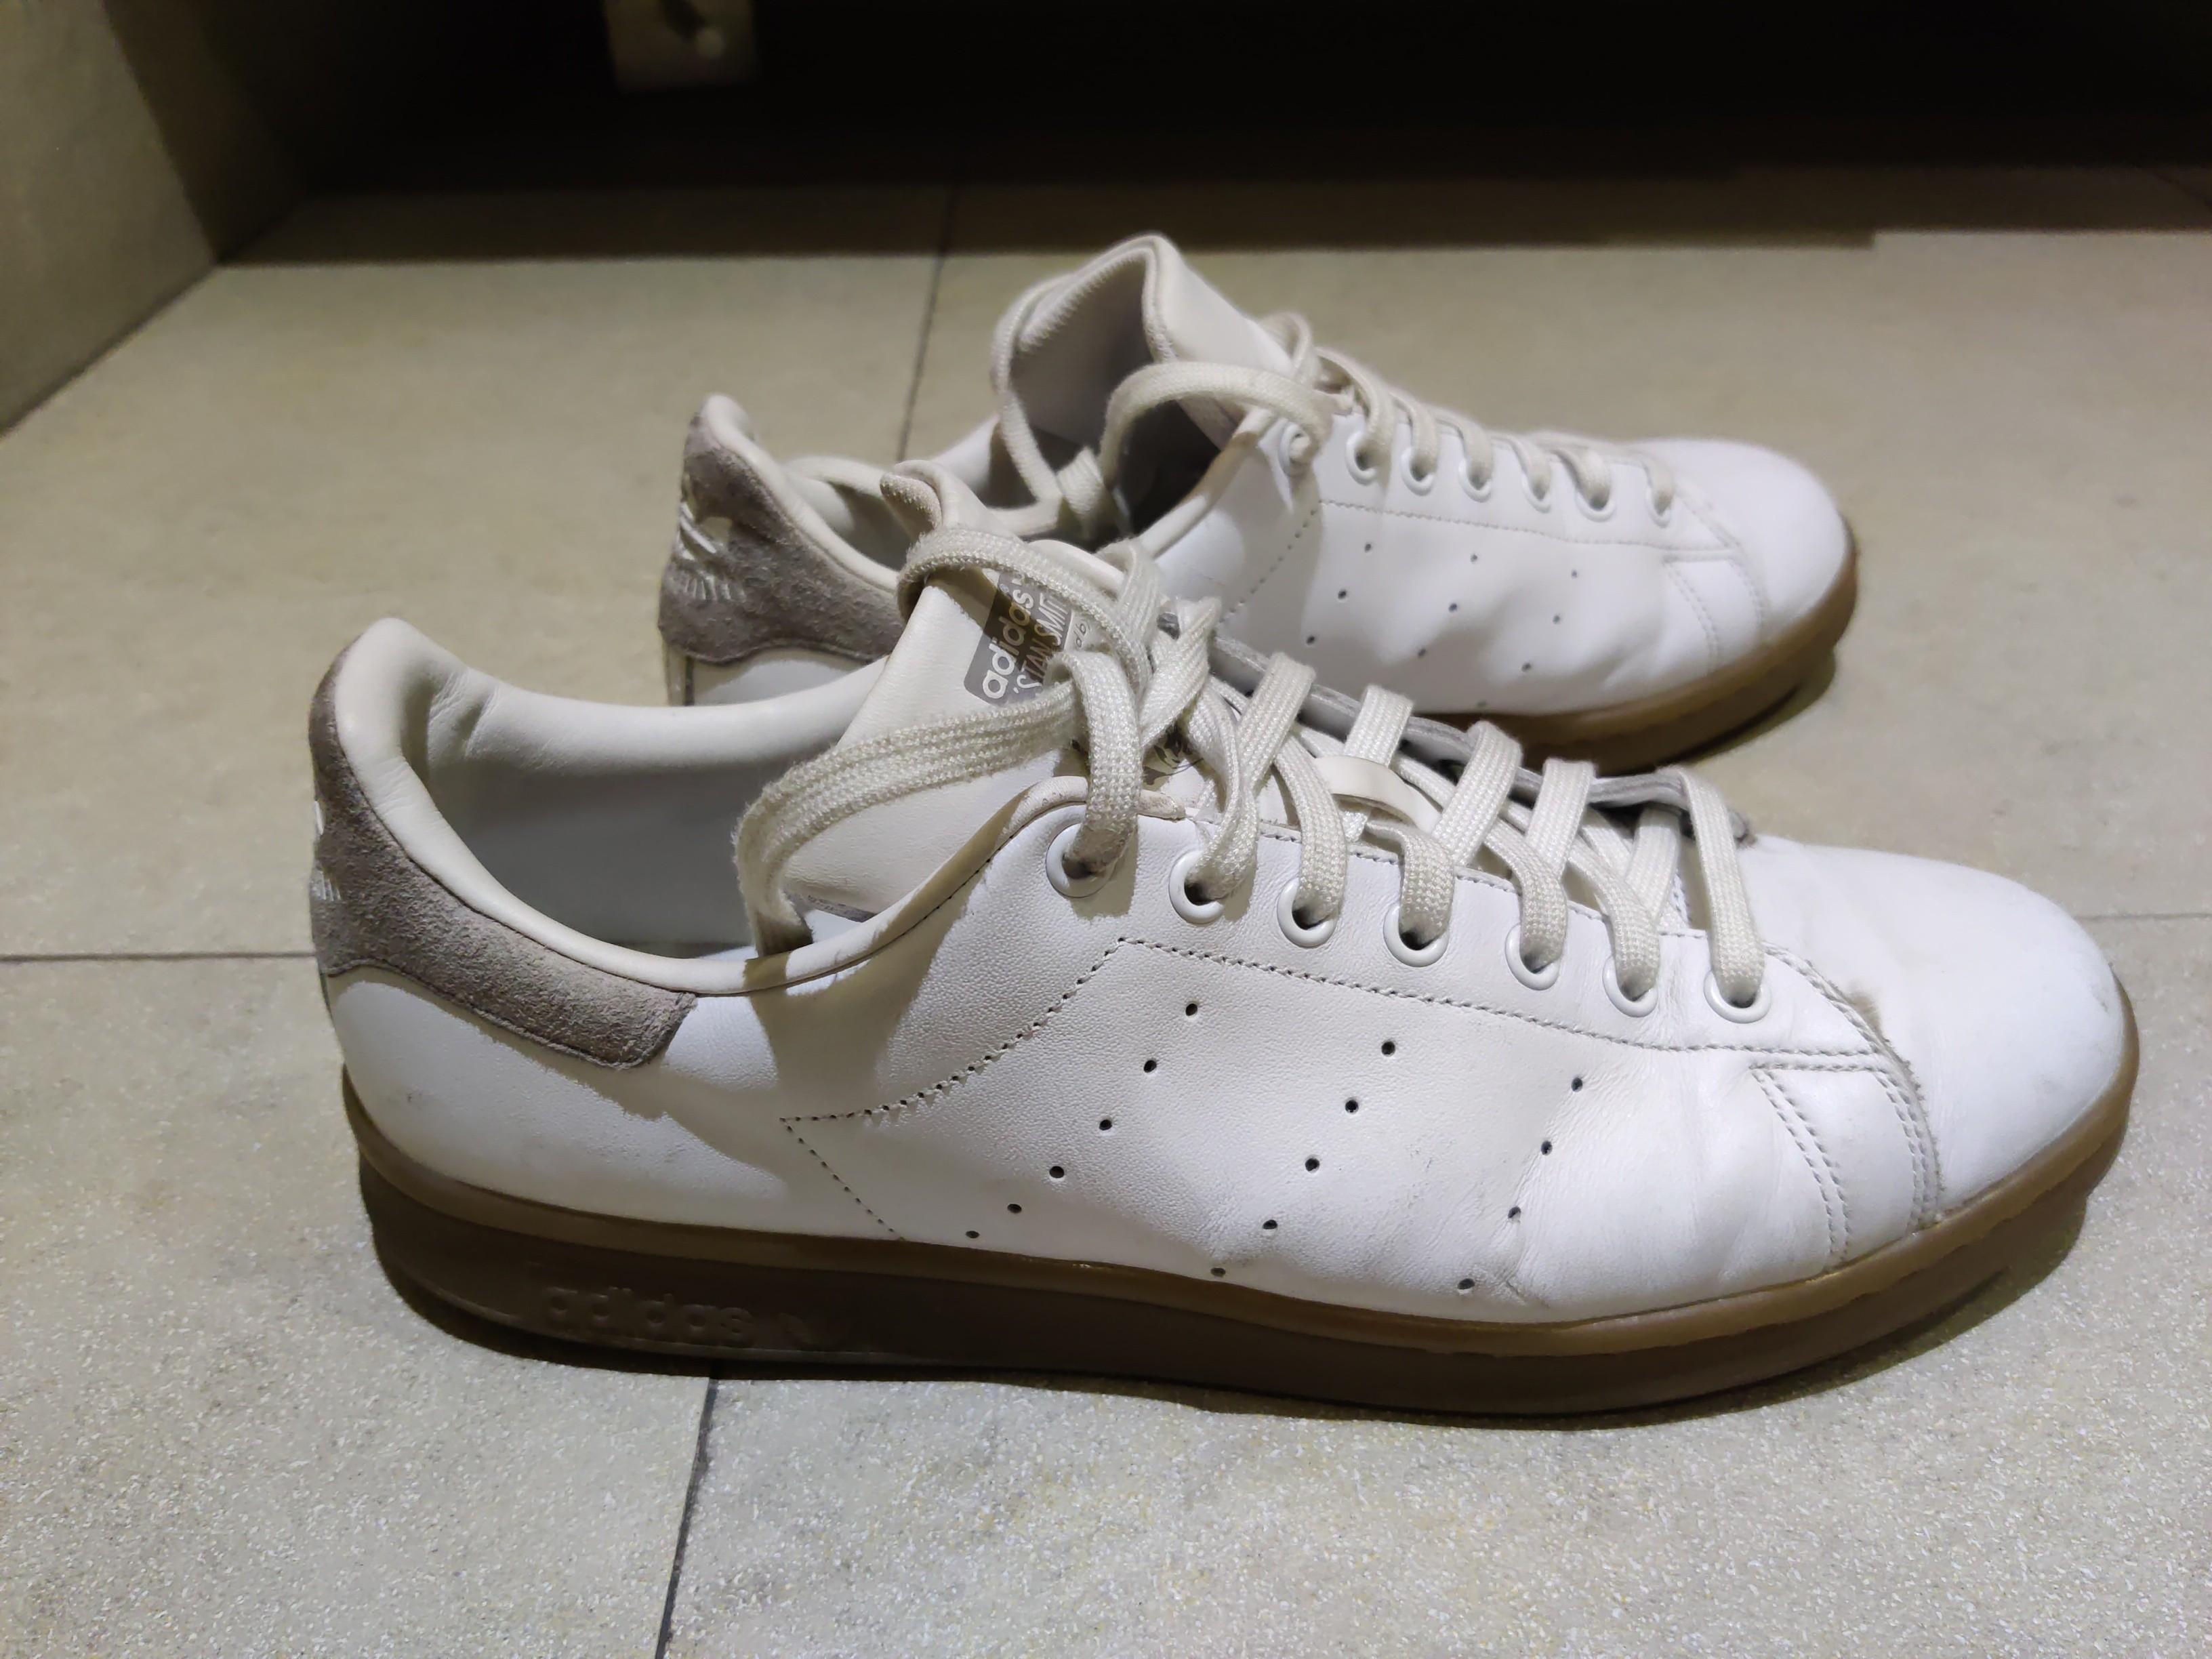 Adidas with gum sole, Men's Fashion, Footwear, Sneakers on